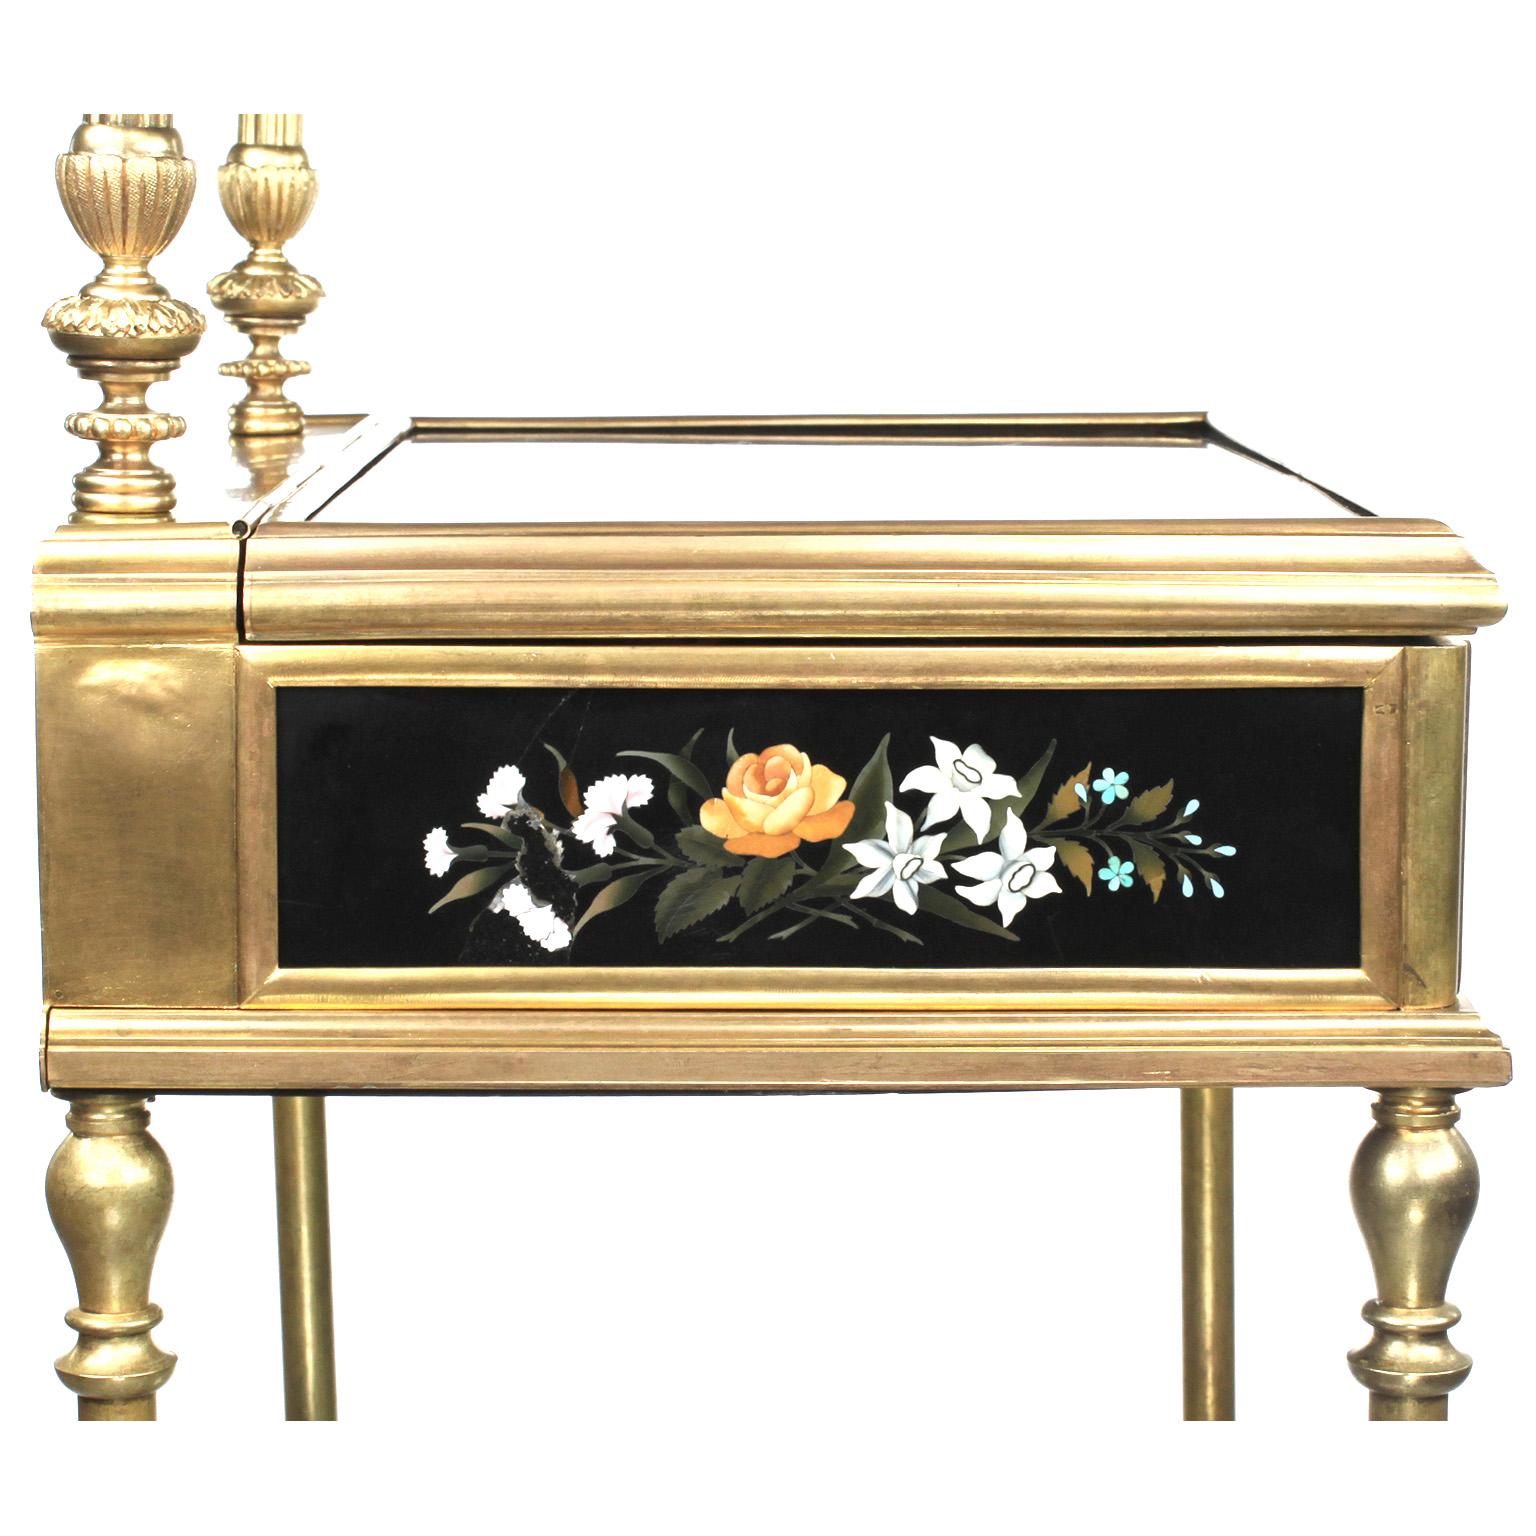 French 19th Century Gilt-Bronze and Pietra Dura Vanity Stand, Attr. Tahan, Paris For Sale 9